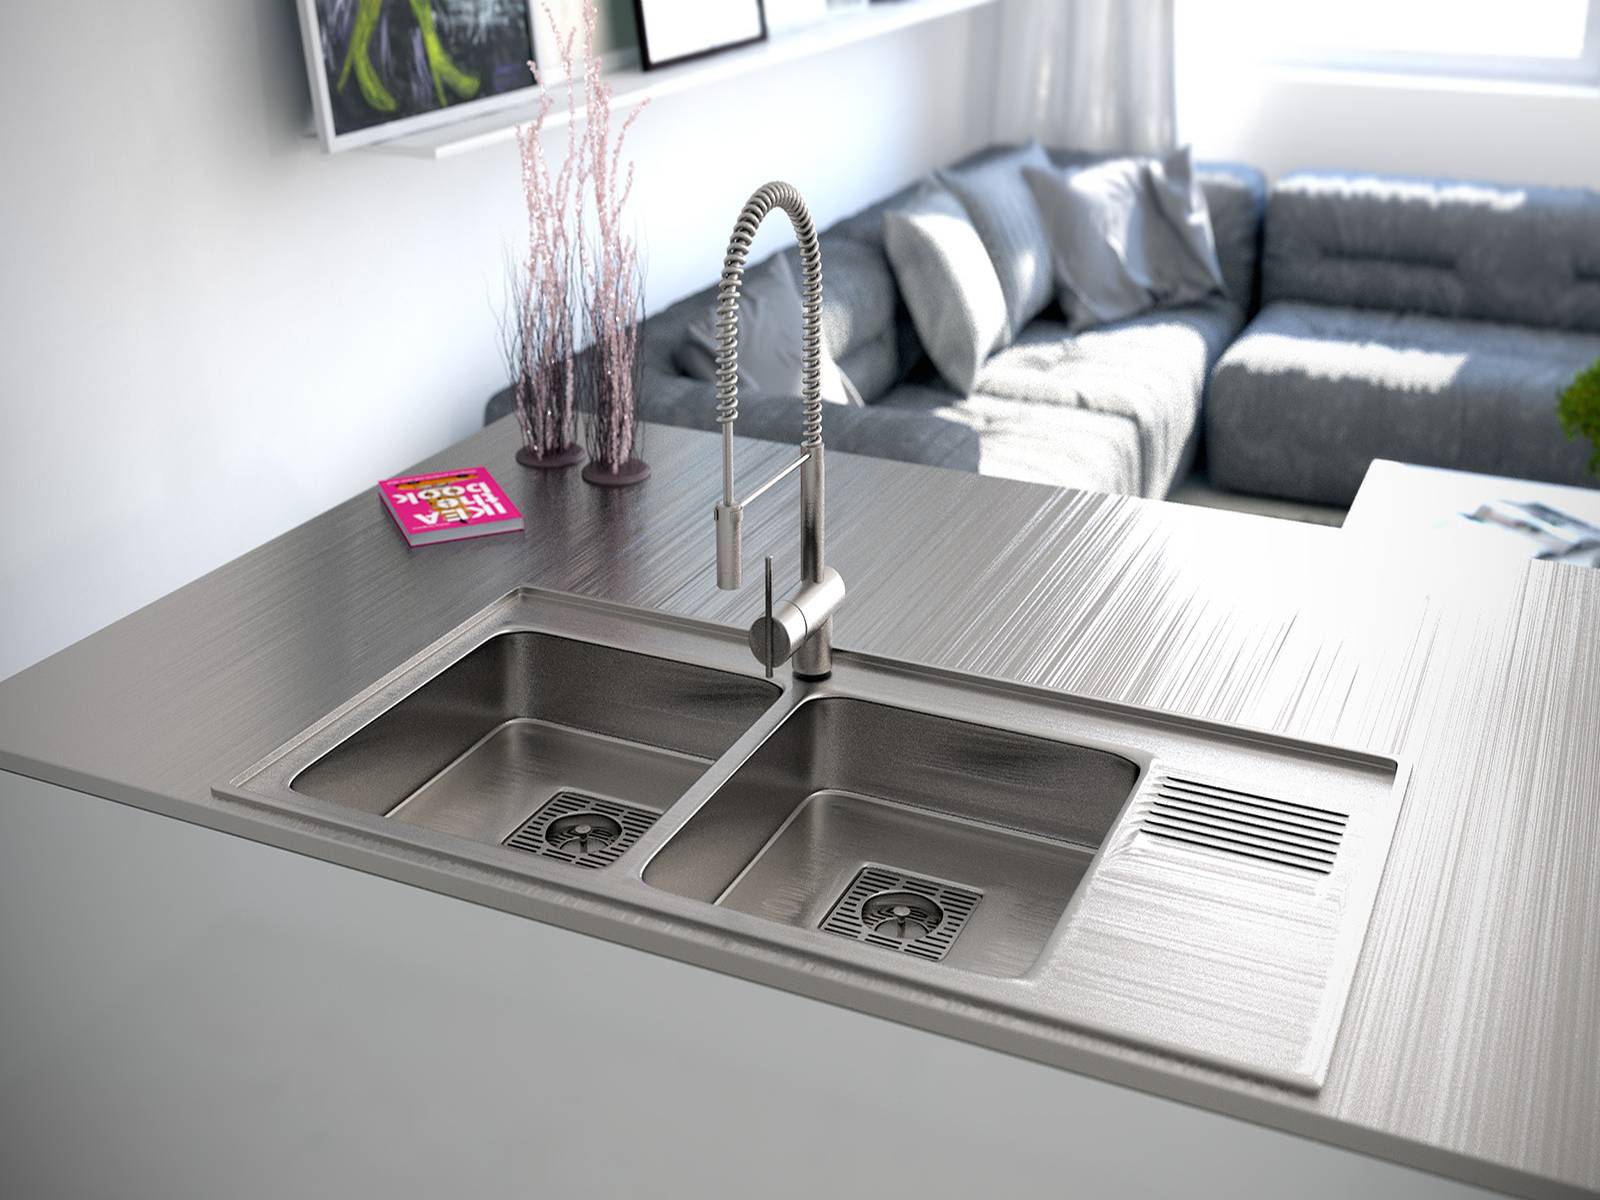 Kitchen Sink Faucet: Indispensable A Modernity